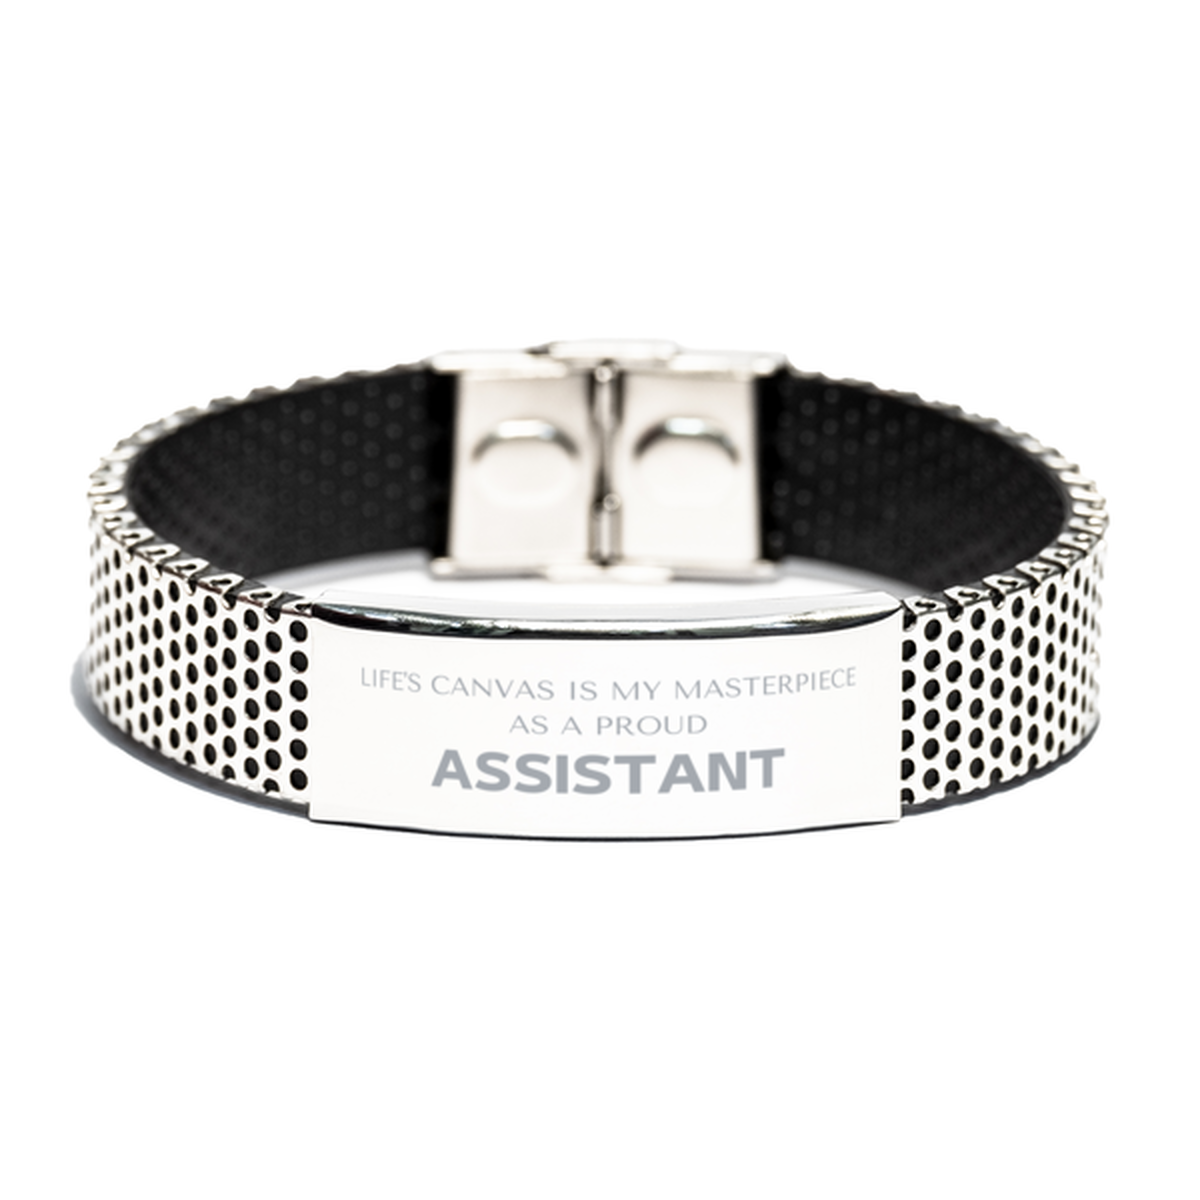 Proud Assistant Gifts, Life's canvas is my masterpiece, Epic Birthday Christmas Unique Stainless Steel Bracelet For Assistant, Coworkers, Men, Women, Friends